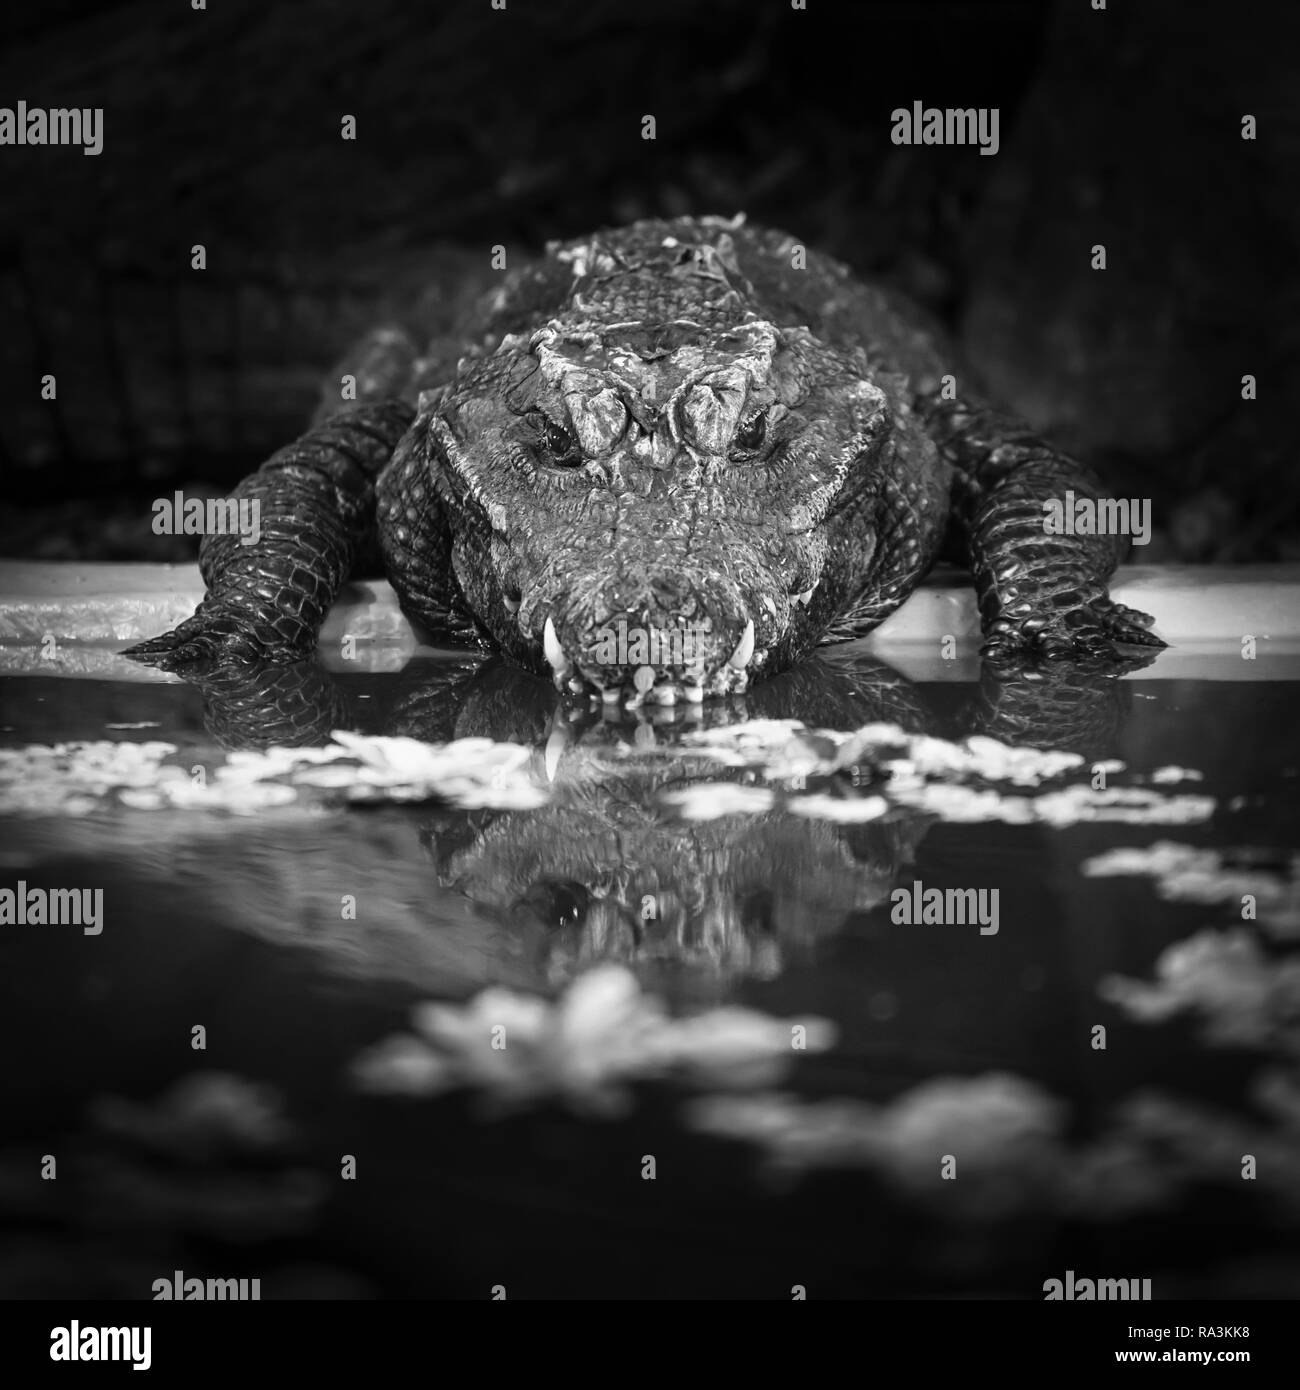 Head on portrait of a crocodile looking back towards the camera with reflection in water. Stock Photo